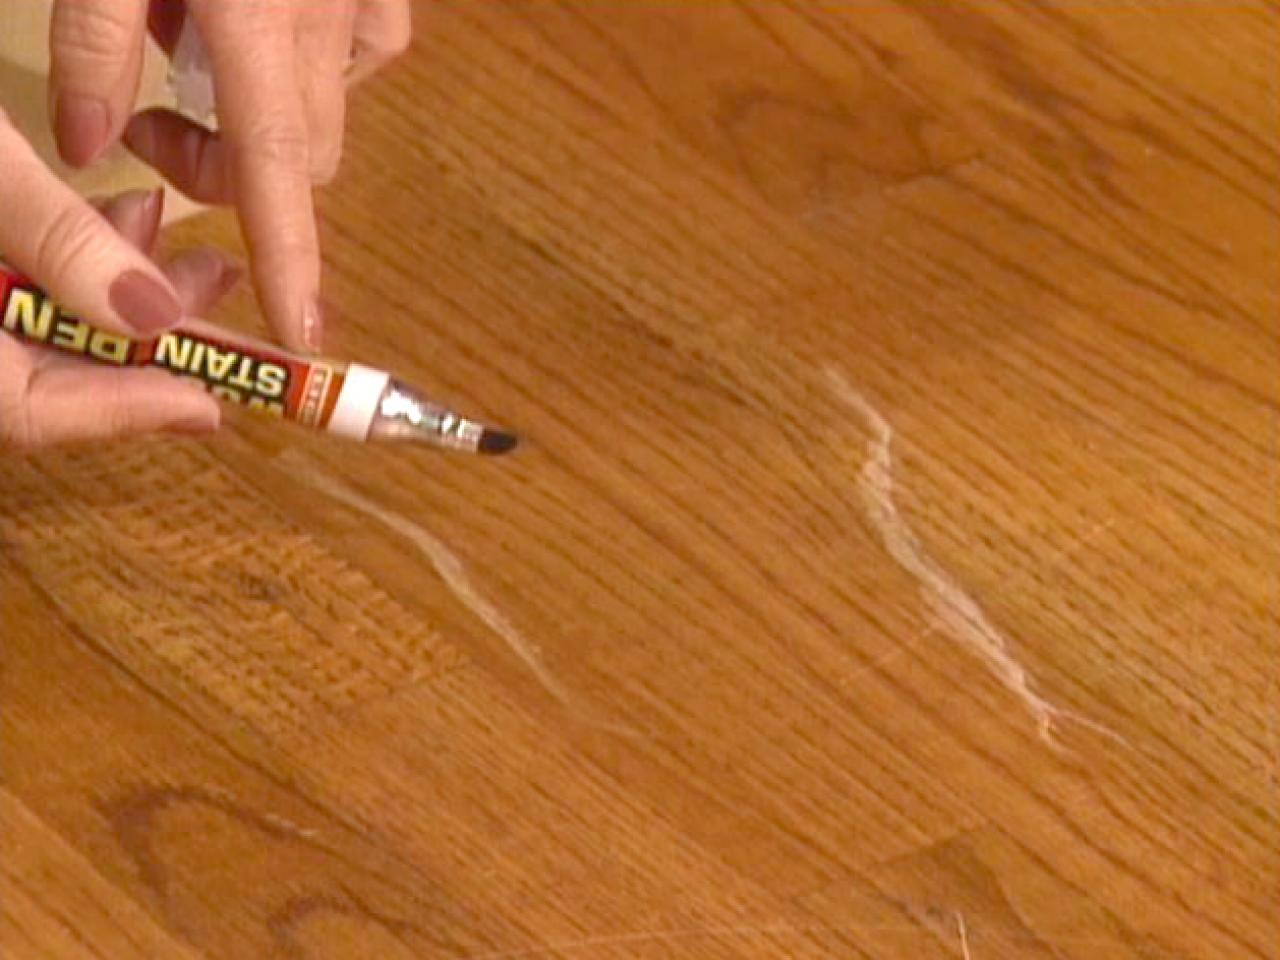 How To Touch Up Wood Floors Tos Diy, How To Get Rid Of Scuff Marks On Laminate Floors